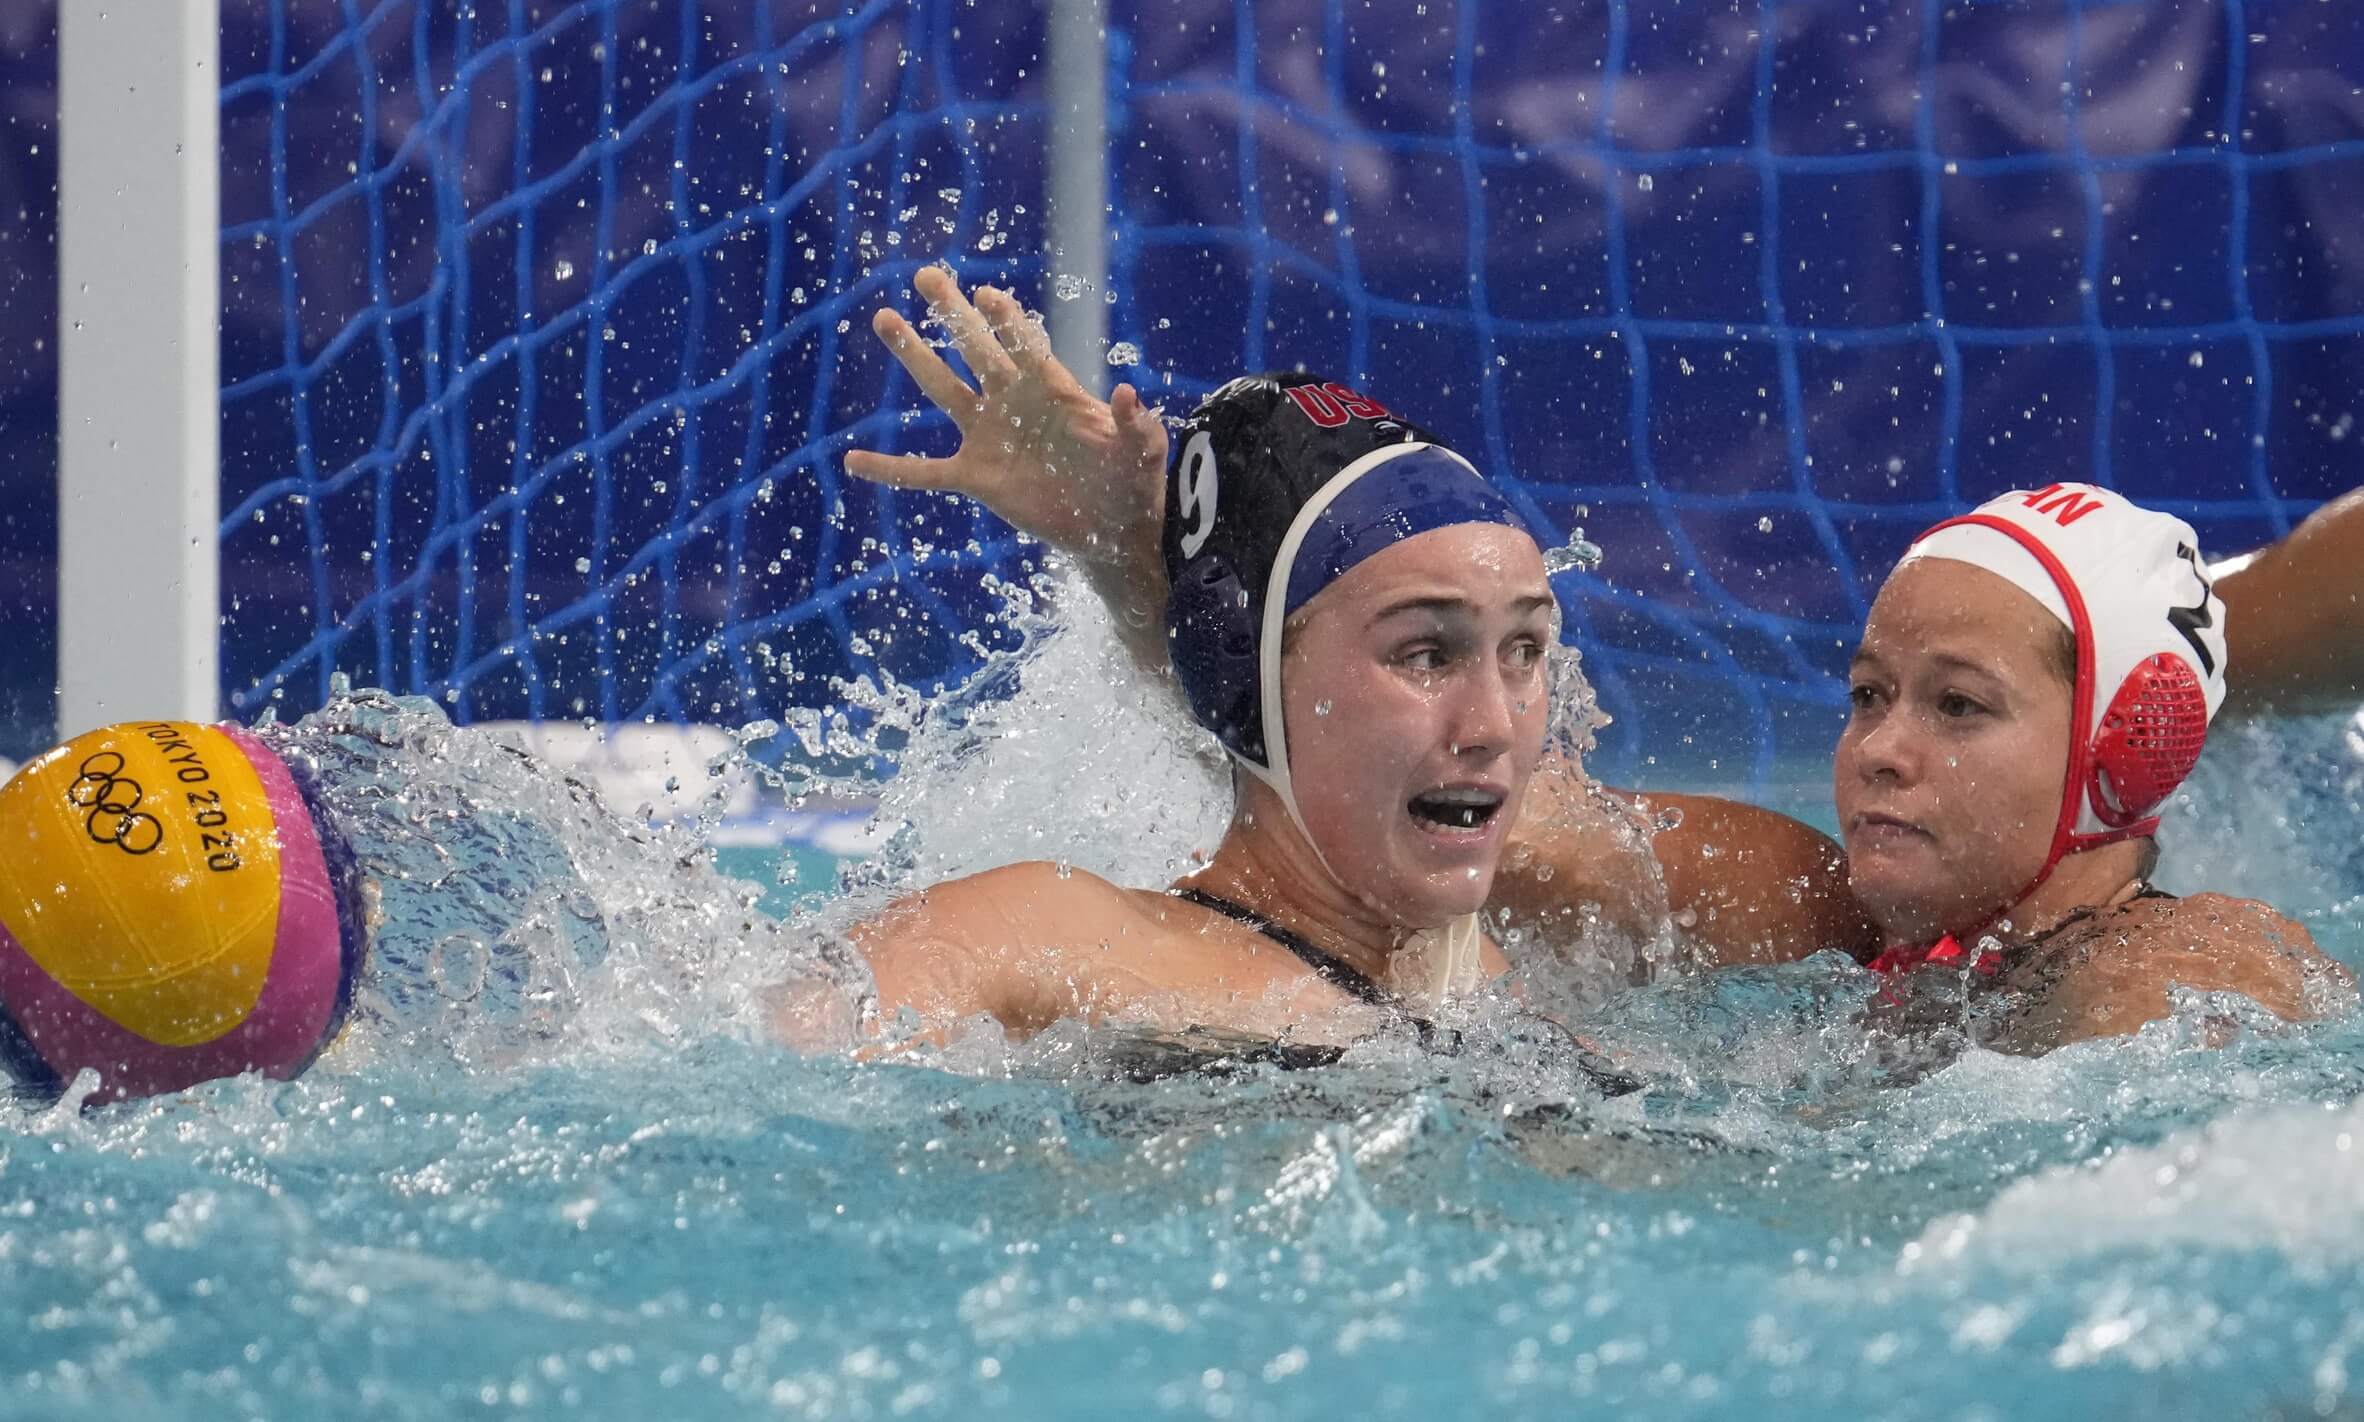 Aug 3, 2021; Tokyo, Japan; Team United States centre forward Aria Fischer (9) and Team Canada centre back Kelly McKee (2) battle for the ball in a women's water polo quarter final match during the Tokyo 2020 Olympic Summer Games at Tatsumi Water Polo Centre. Mandatory Credit: Robert Hanashiro-USA TODAY Sports